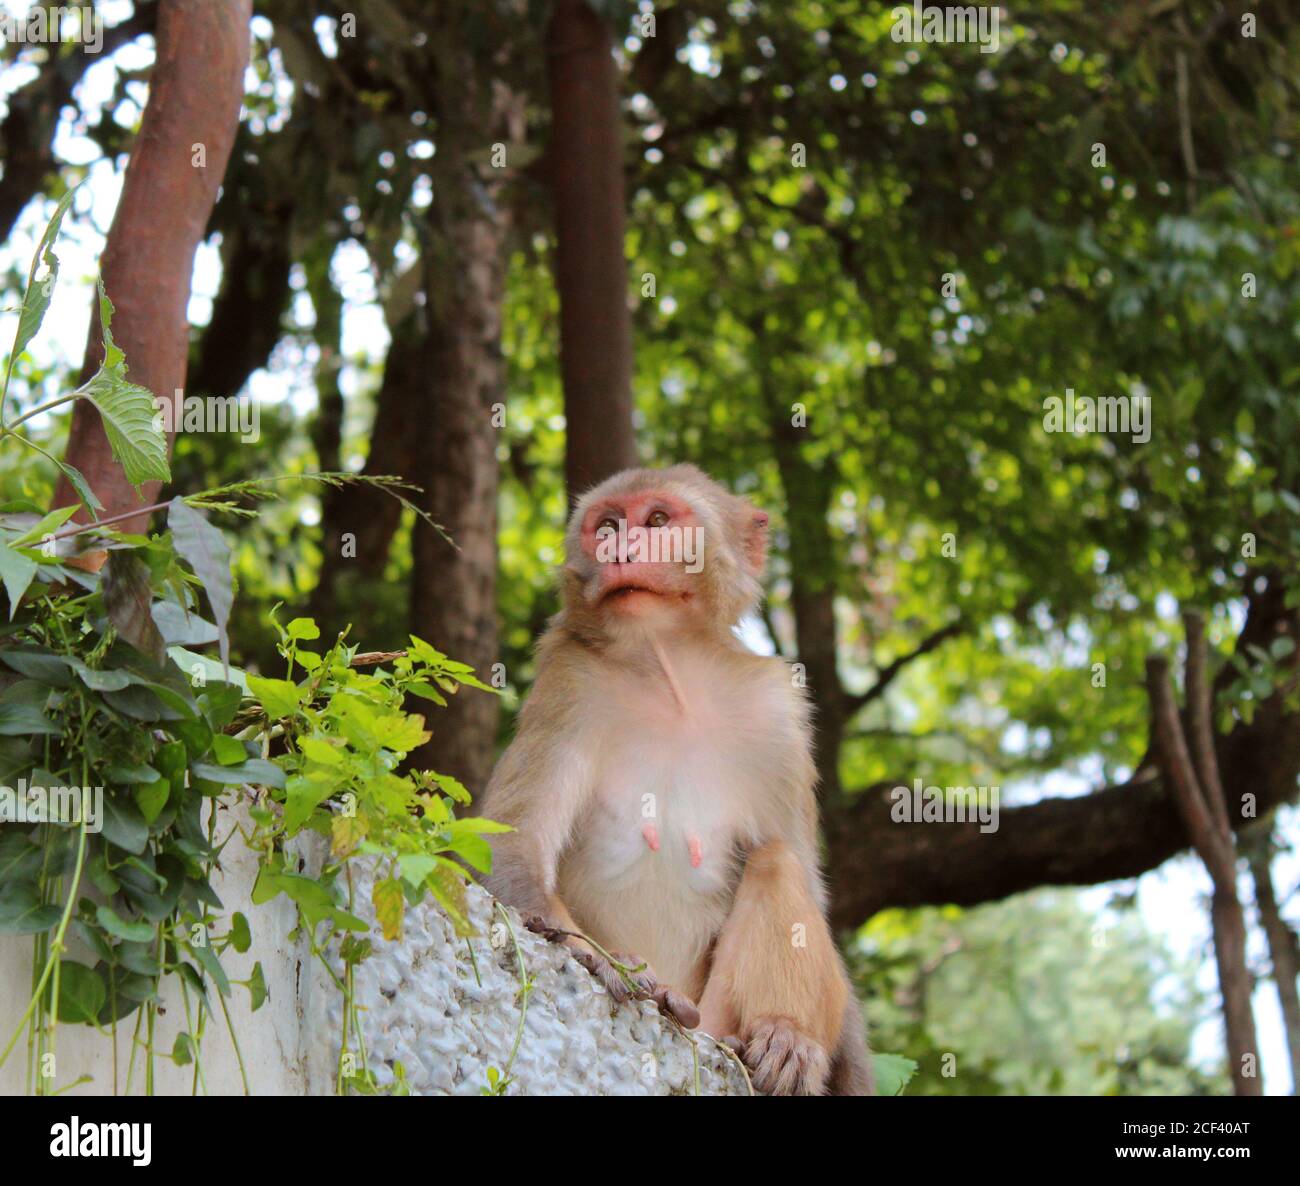 Monkey sitting on a wall, trees are behind. Stock Photo